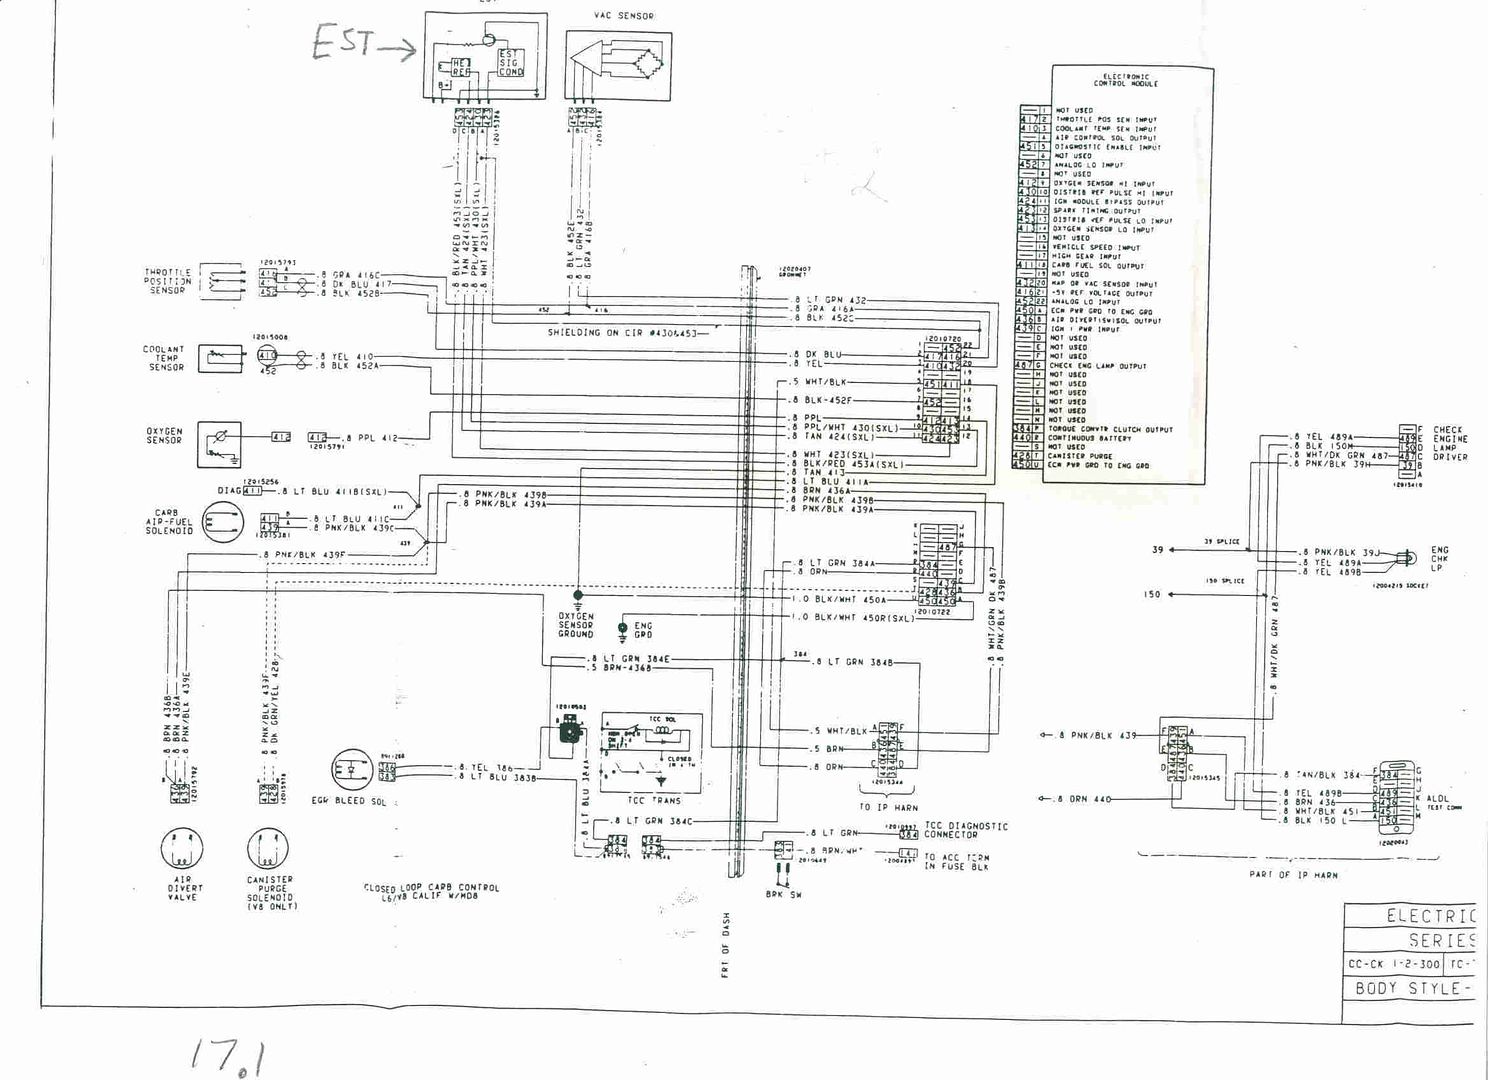 Wiring diagram for 84 6.2 Diesel Stick - The 1947 - Present Chevrolet